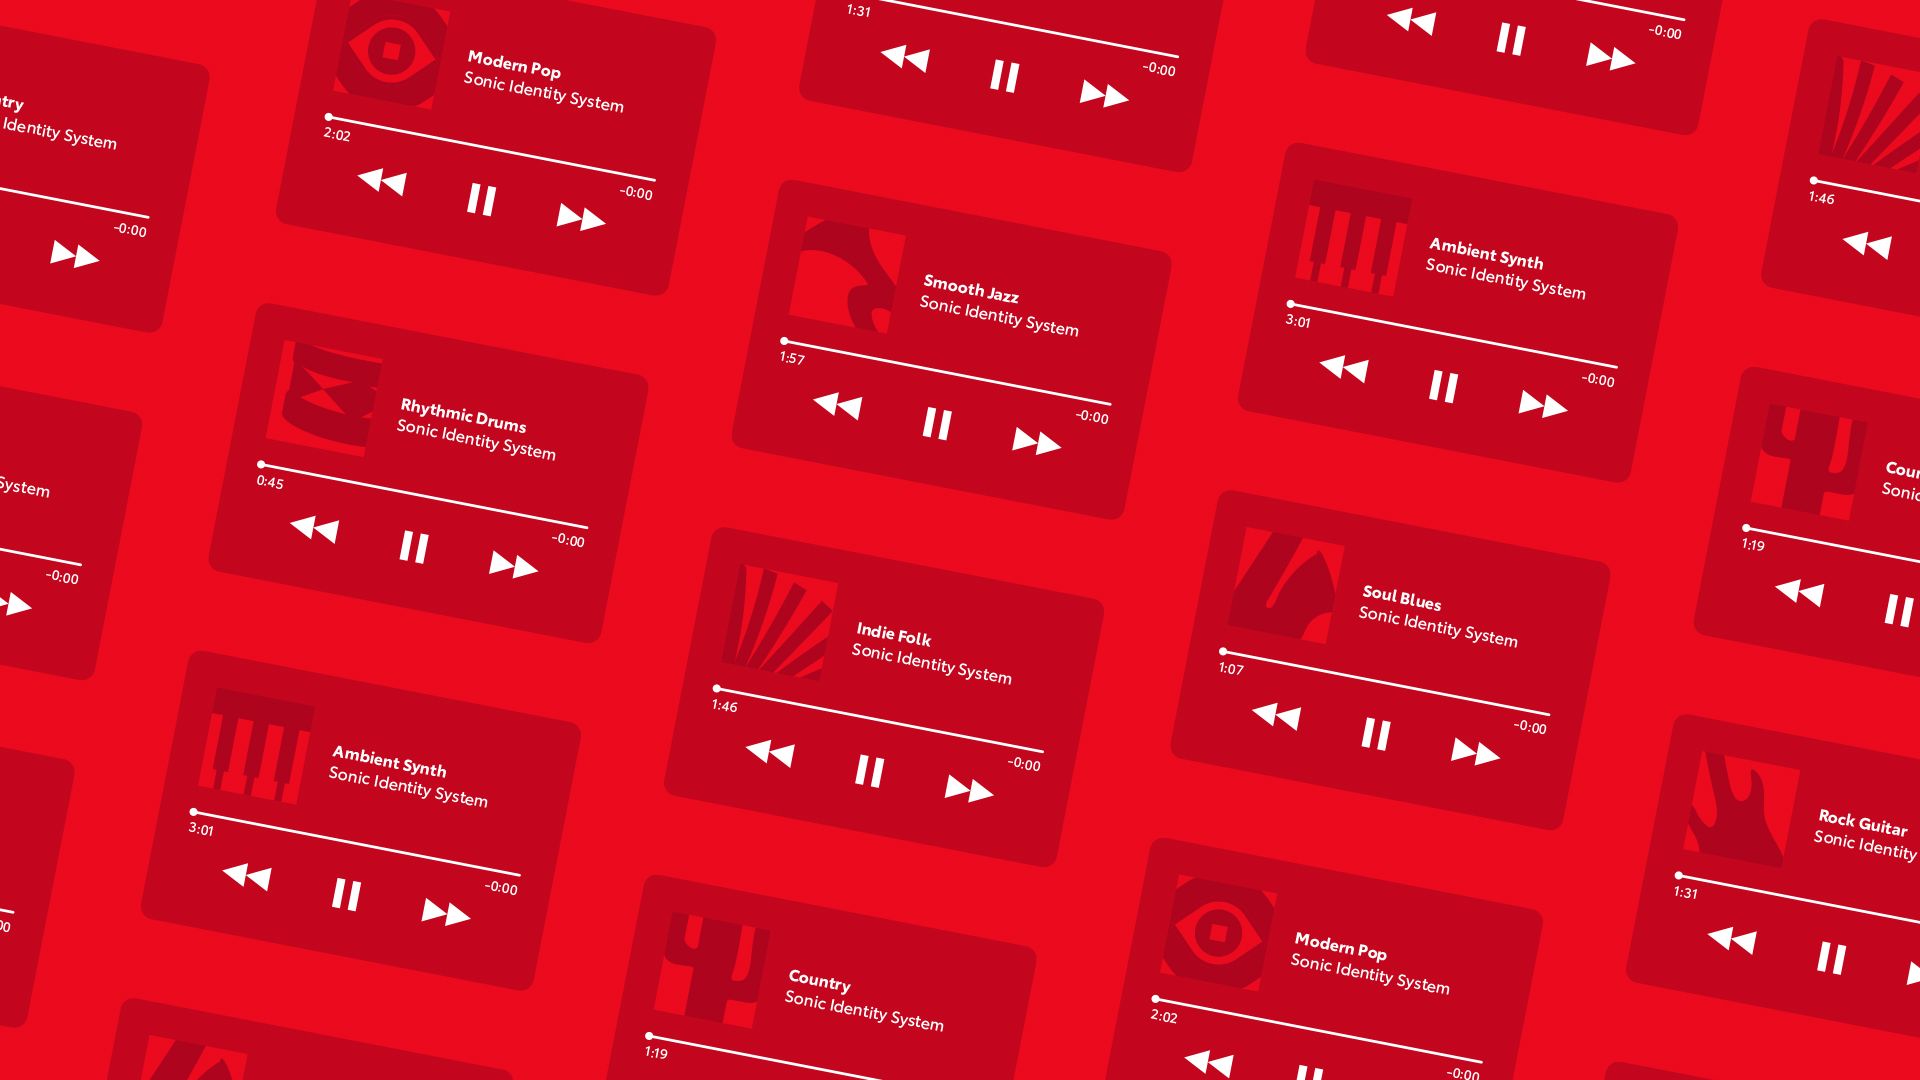 Music player graphics showing multiple Watermark tracks.